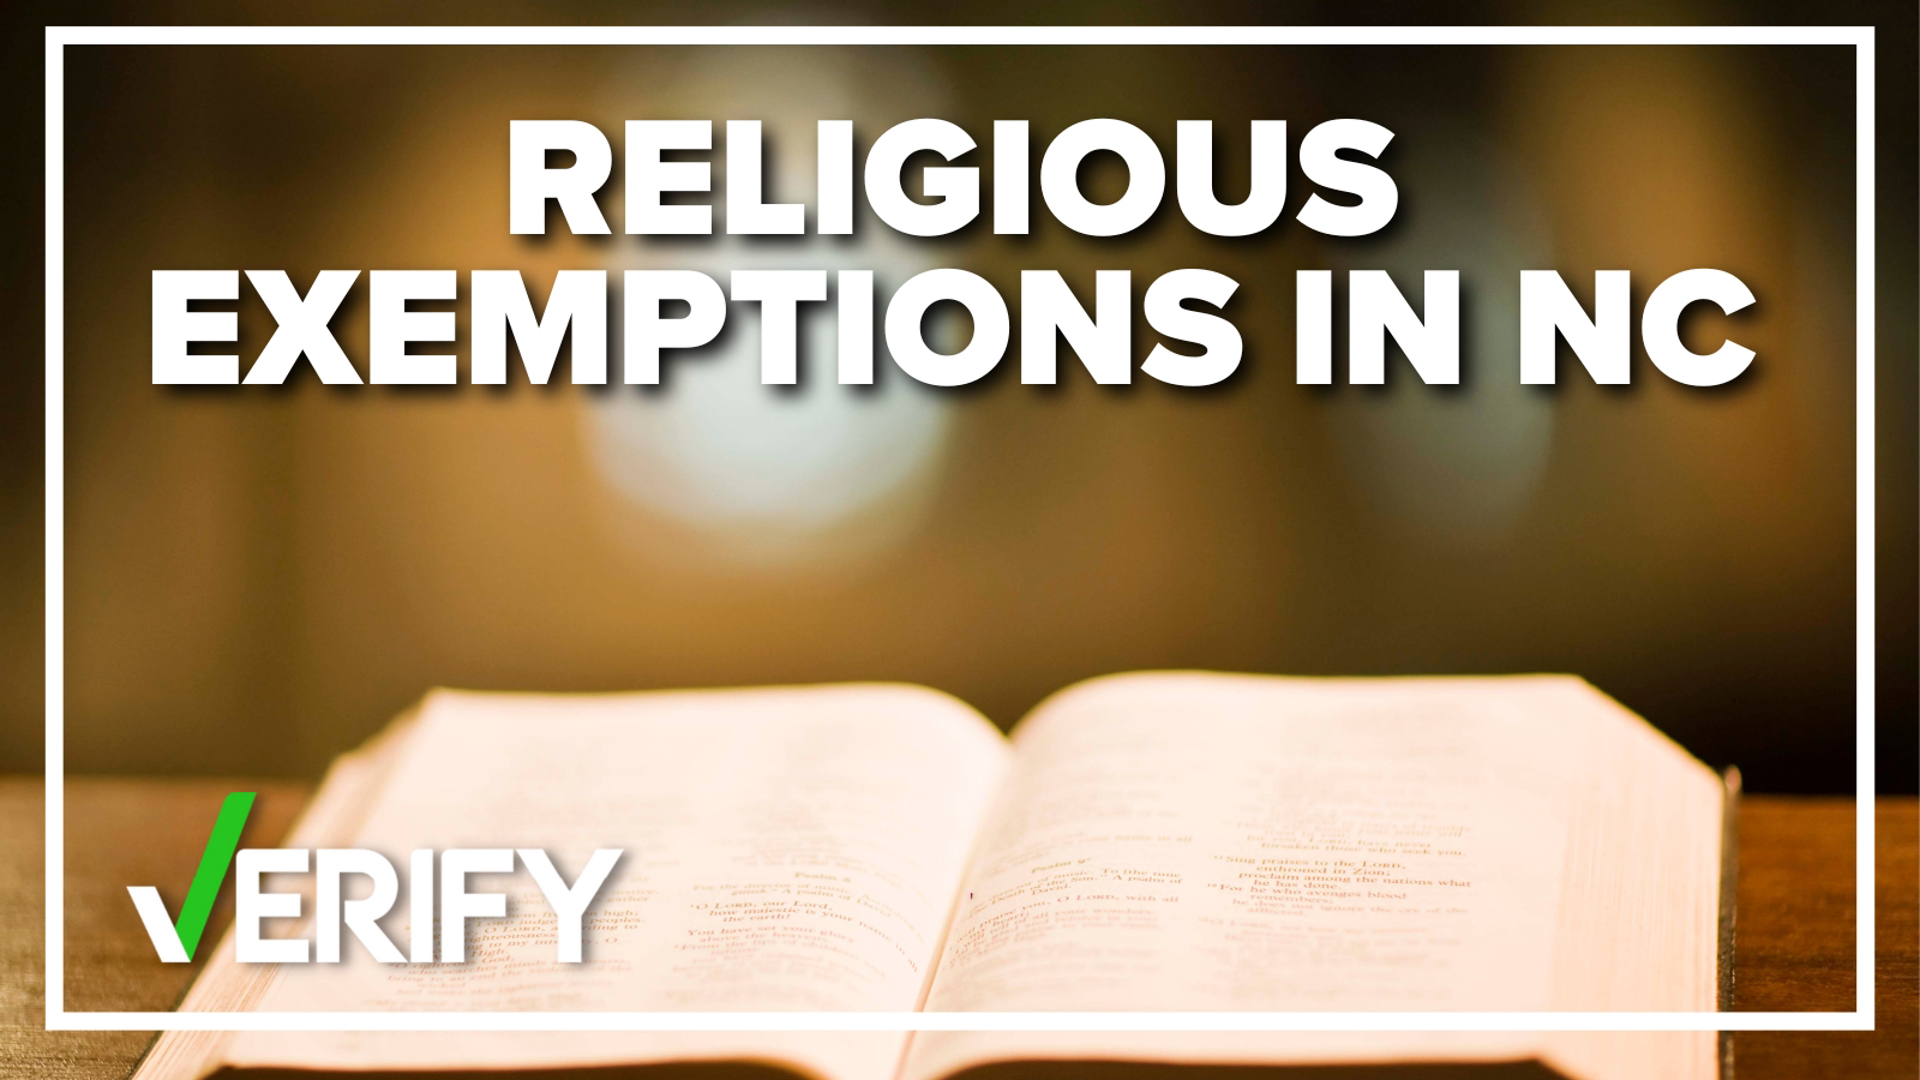 Some exemptions are easier to accommodate than others, and the law acts to protect people’s religious beliefs, but it also works to protect employers.